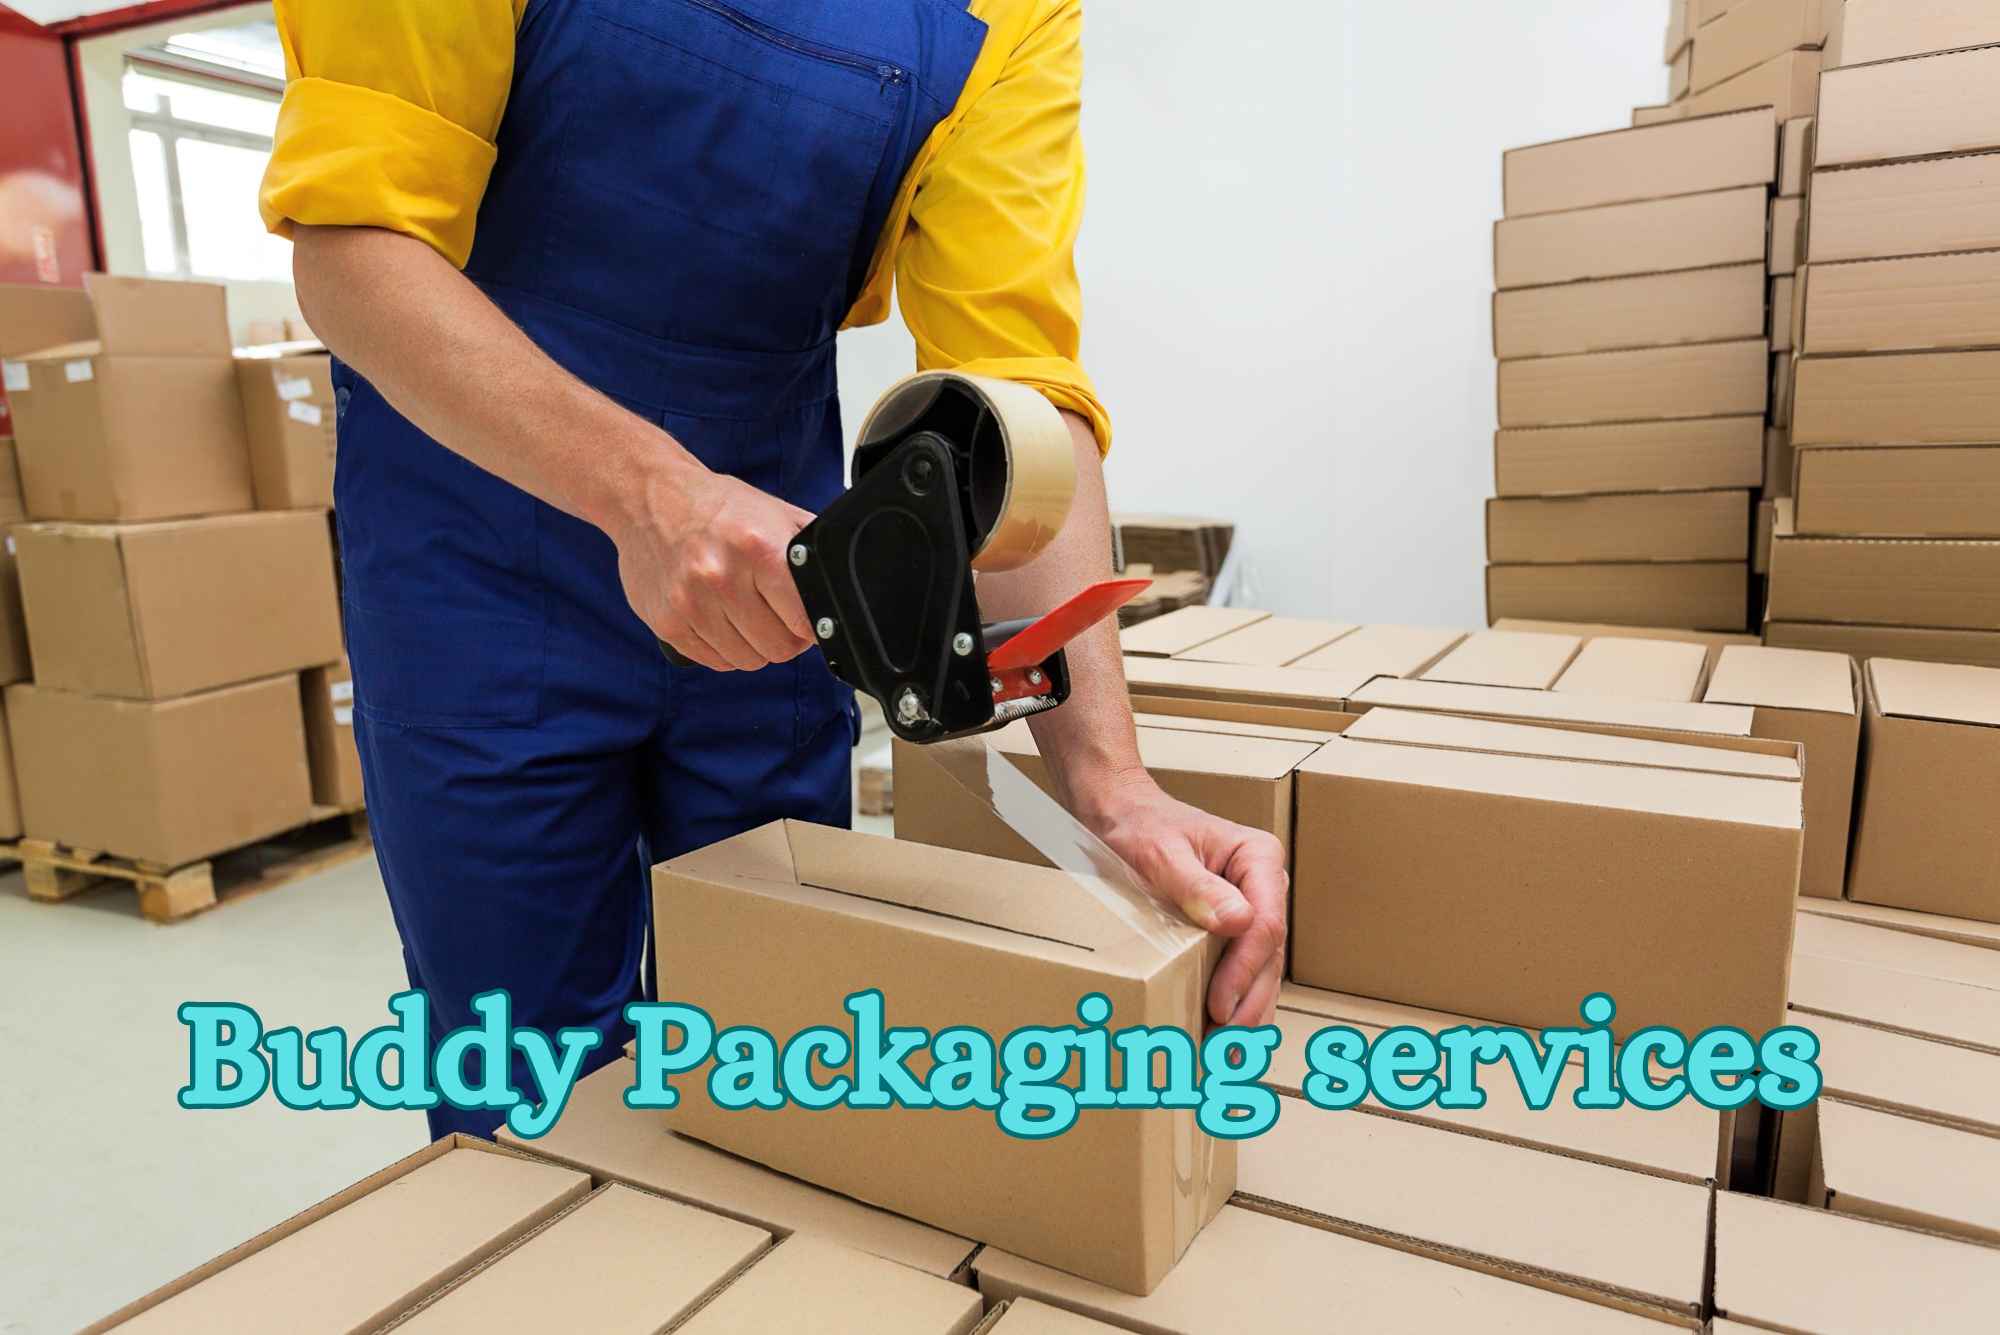 Buddy Packaging services